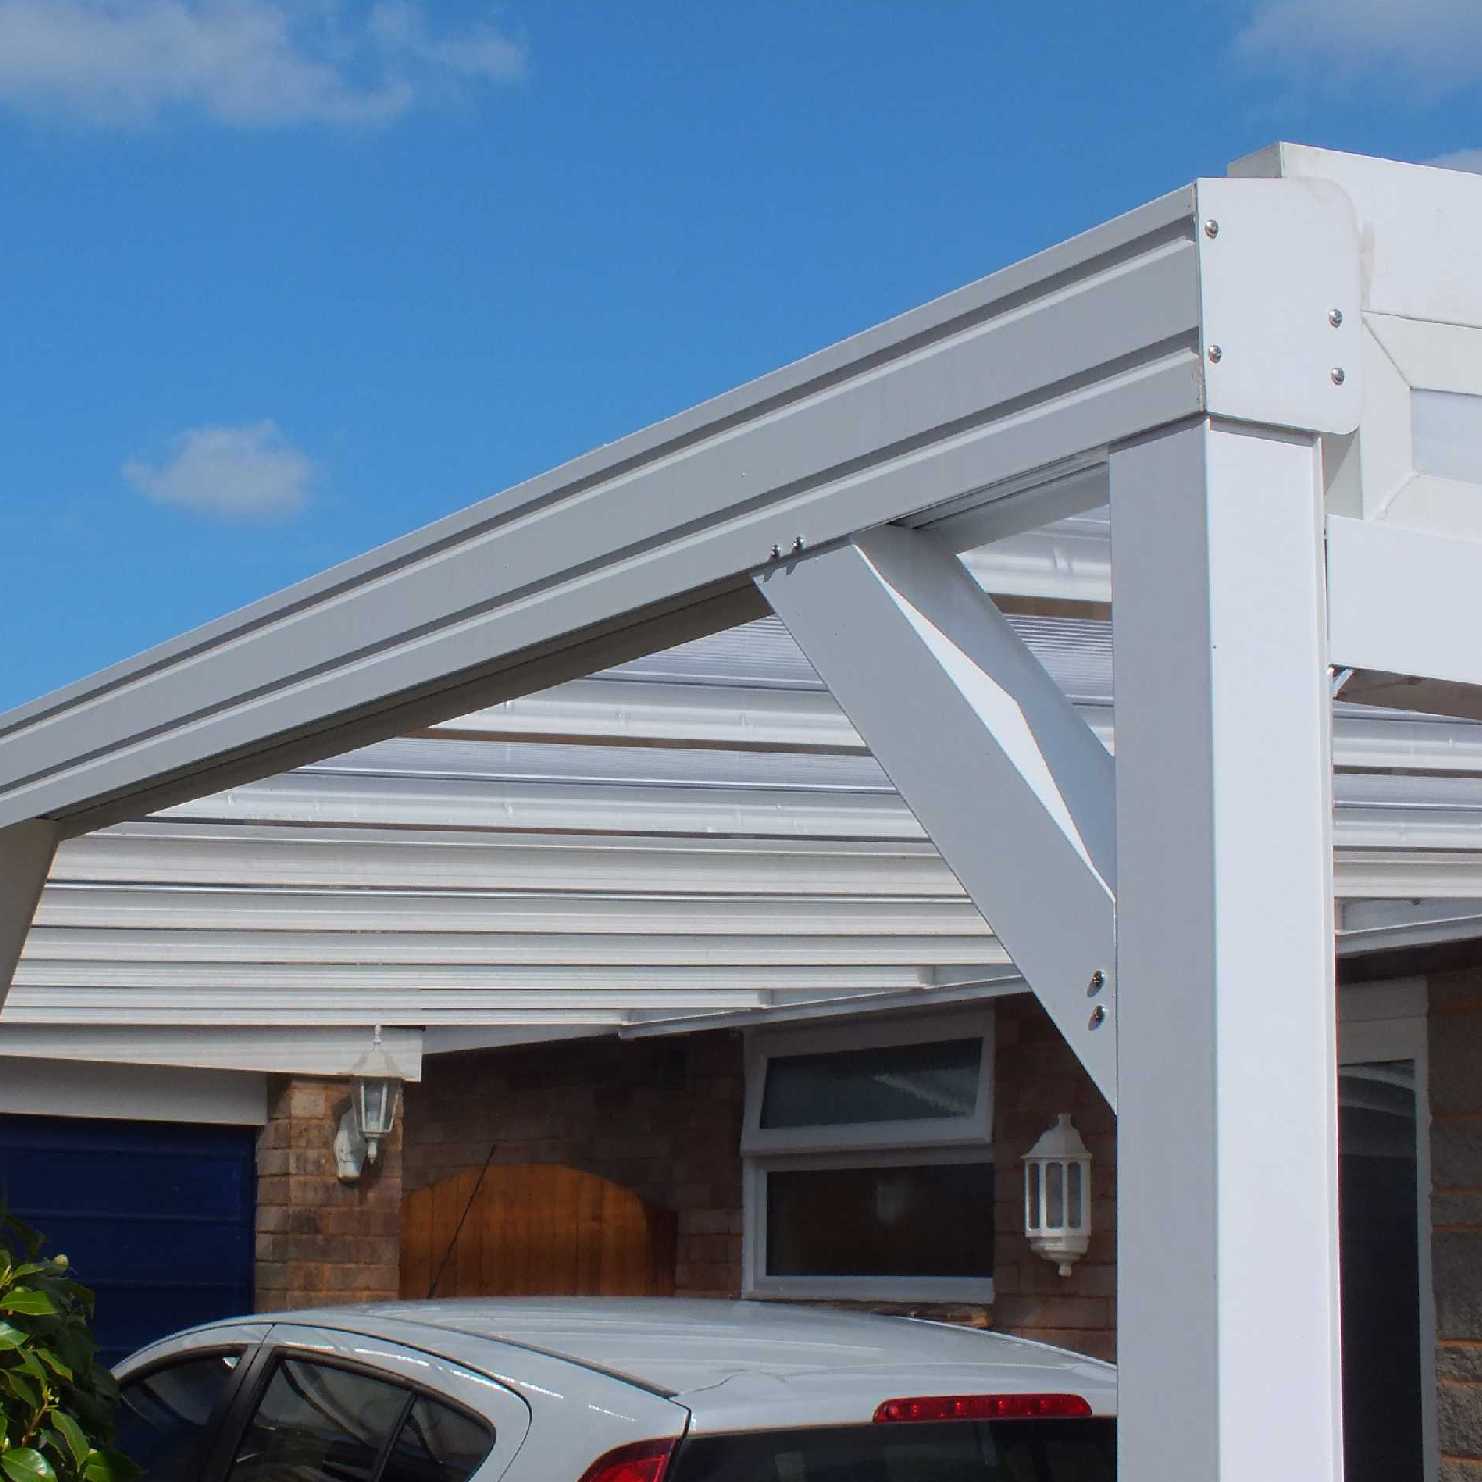 Great deals on Omega Smart Lean-To Canopy, White with 16mm Polycarbonate Glazing - 11.6m (W) x 2.0m (P), (5) Supporting Posts